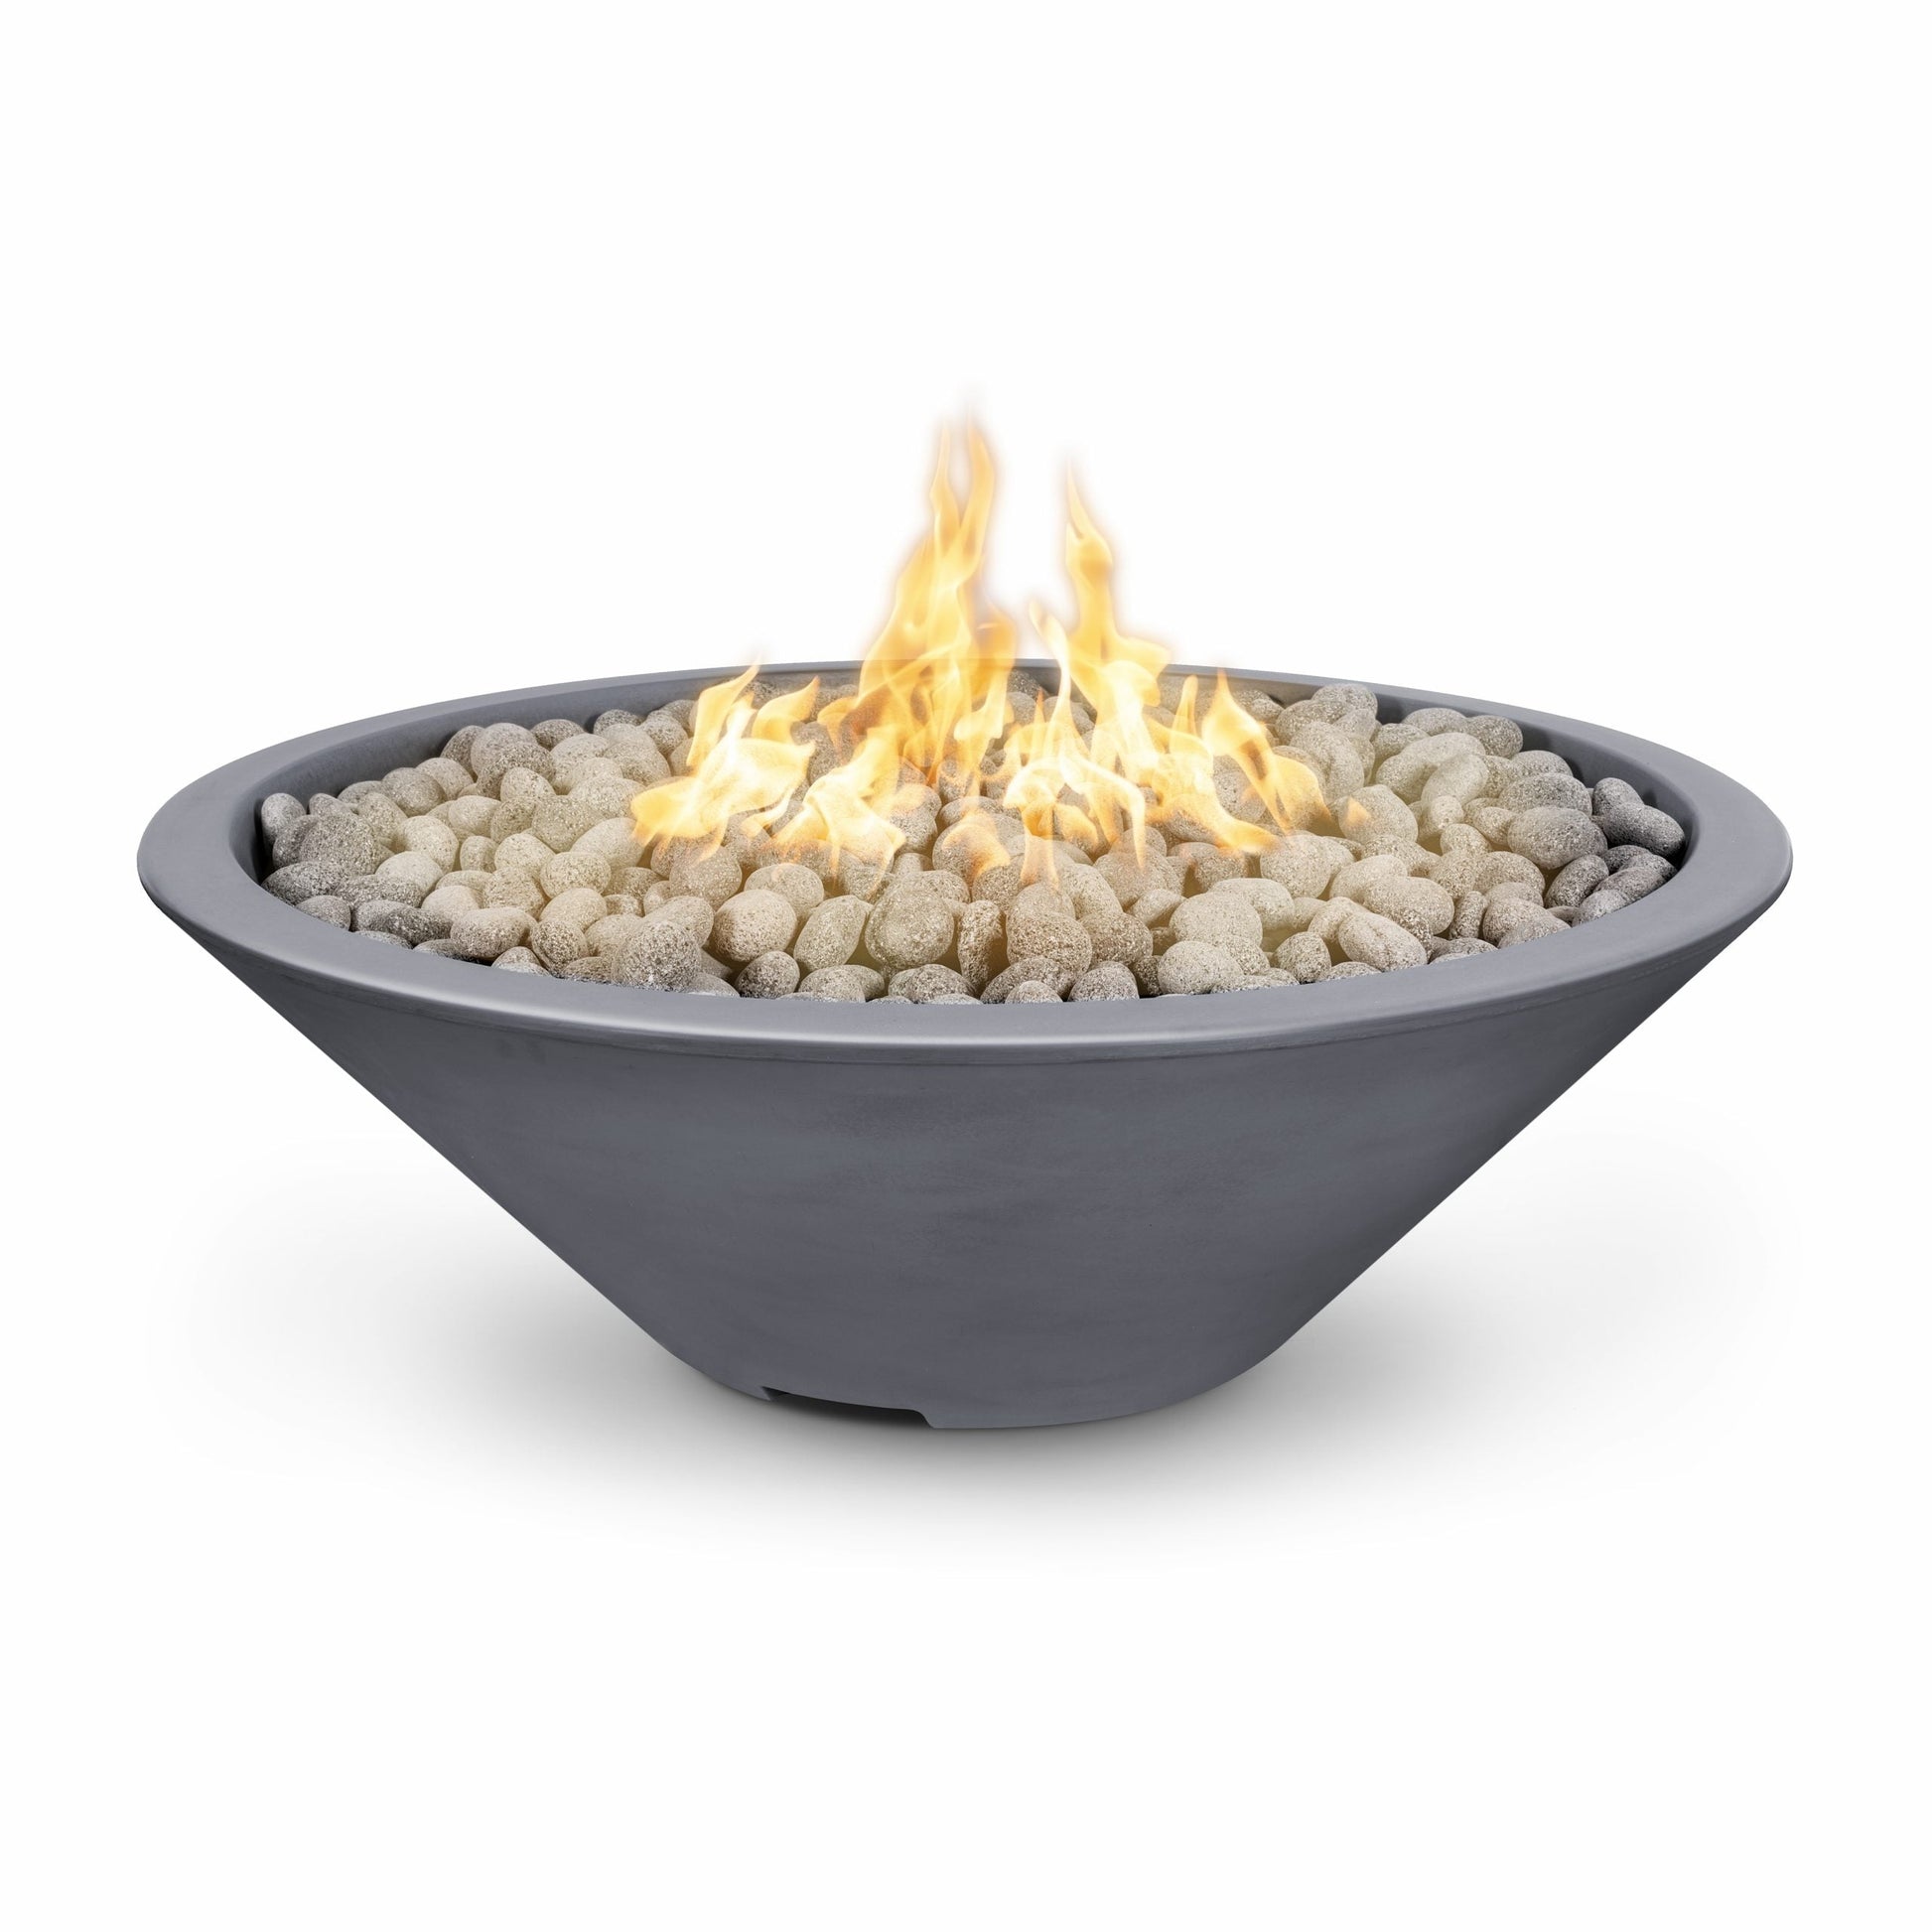 The Outdoor Plus Round Cazo 48" Silver Vein Powder Coated Metal Liquid Propane Fire Pit with Flame Sense with Spark Ignition